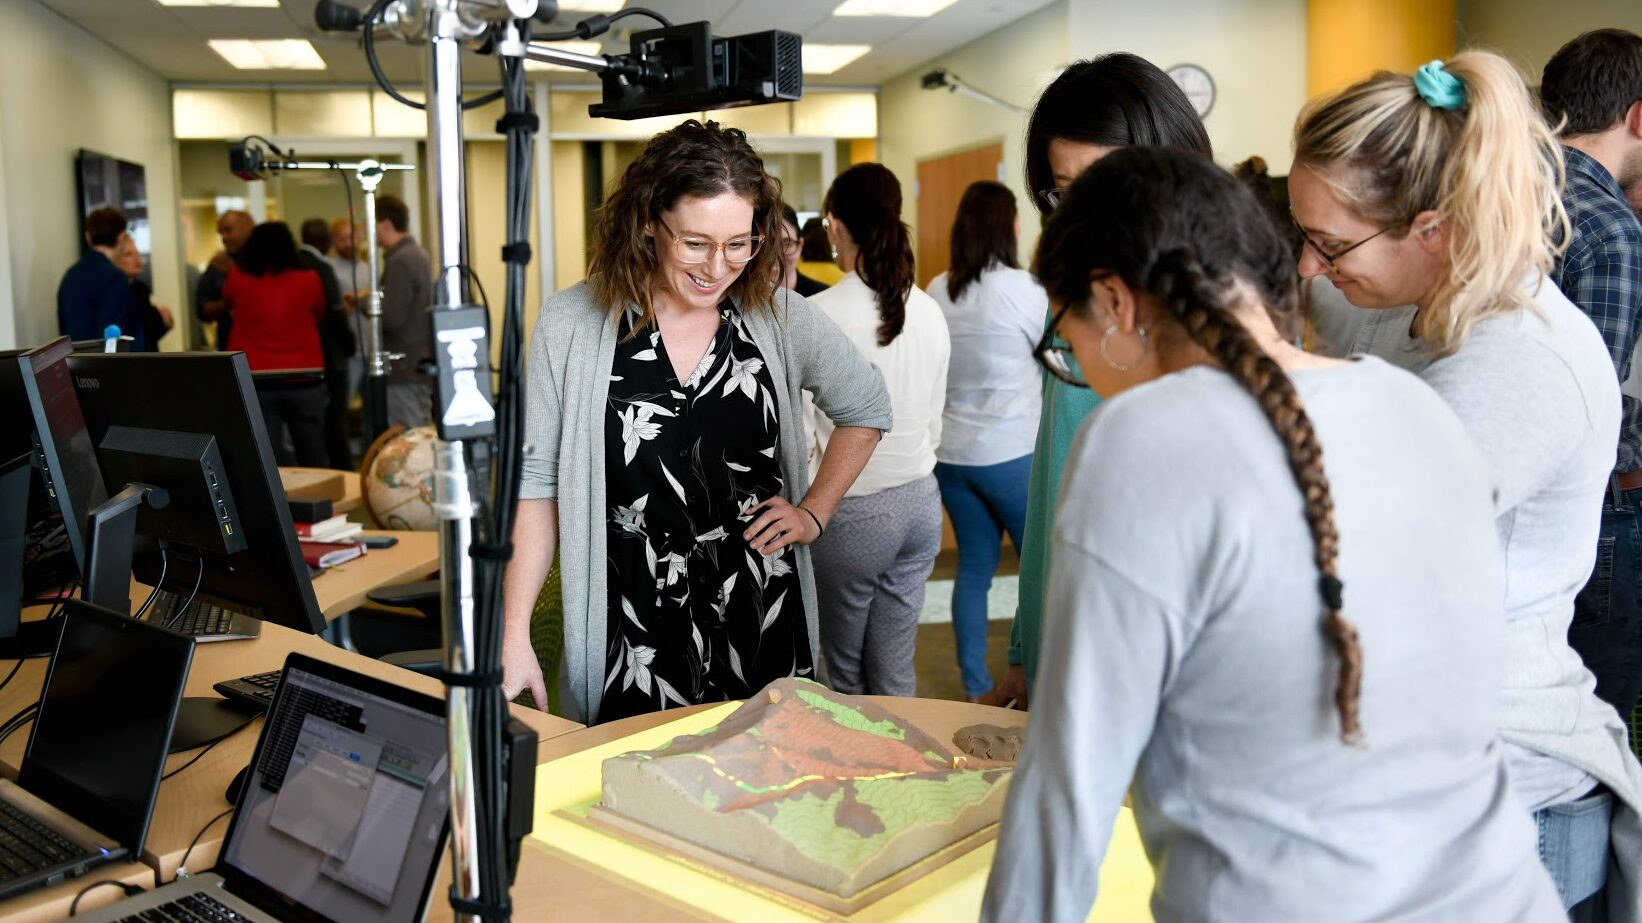 Nikki Inglis, center, greets guests at a Geospatial Analytics demonstration last year.